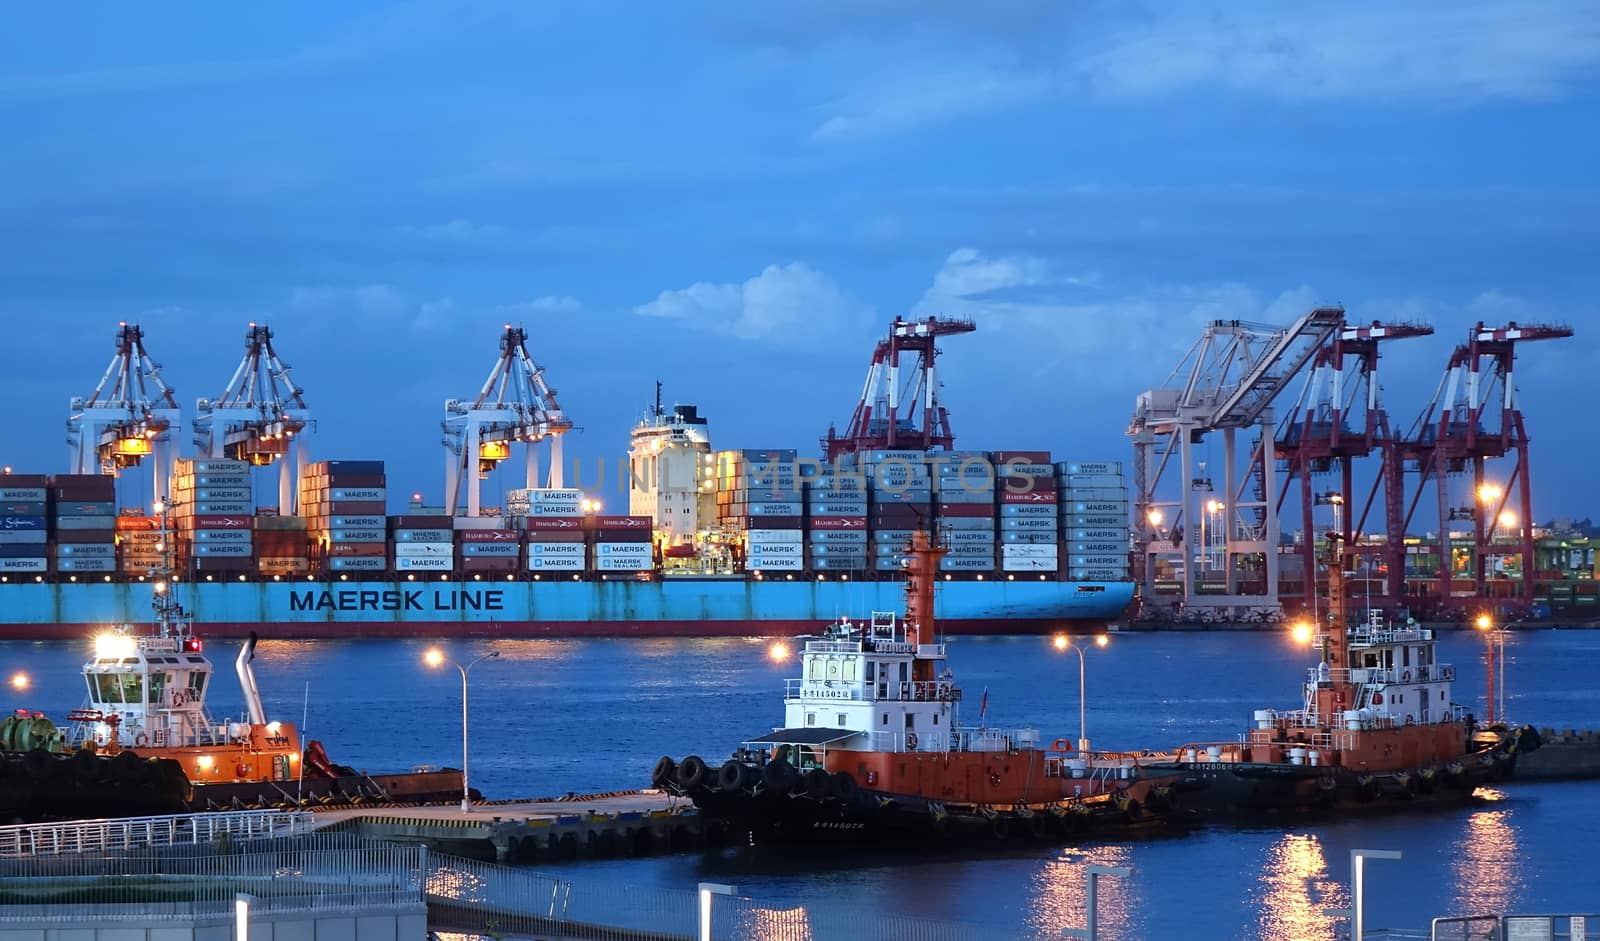 KAOHSIUNG, TAIWAN -- JUNE 2, 2019: A view of the busy Kaohsiung container shipment port at evening time.